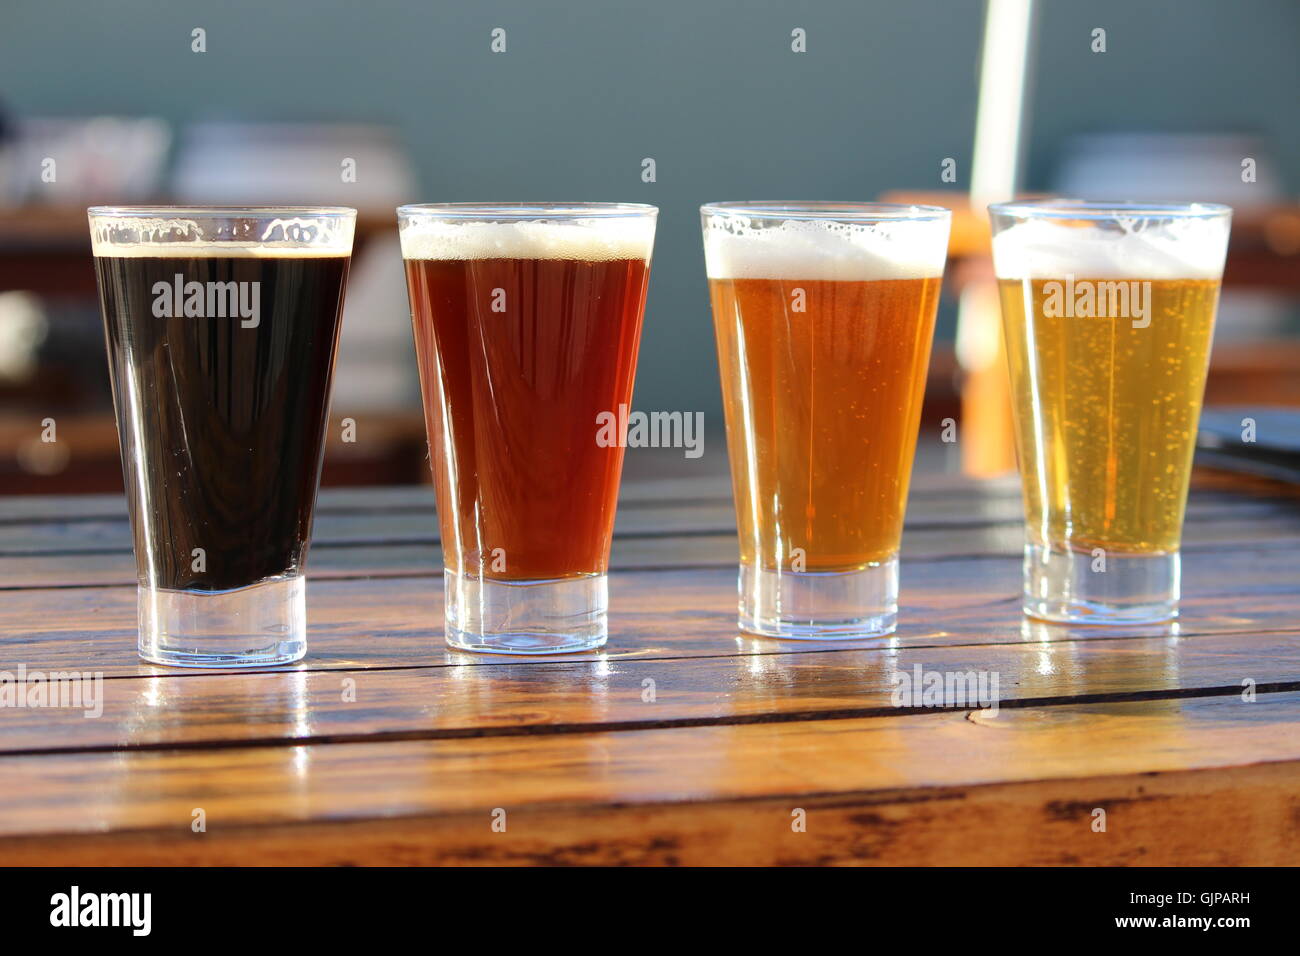 A selection of four craft beers during a tasting session on a wooden table Stock Photo